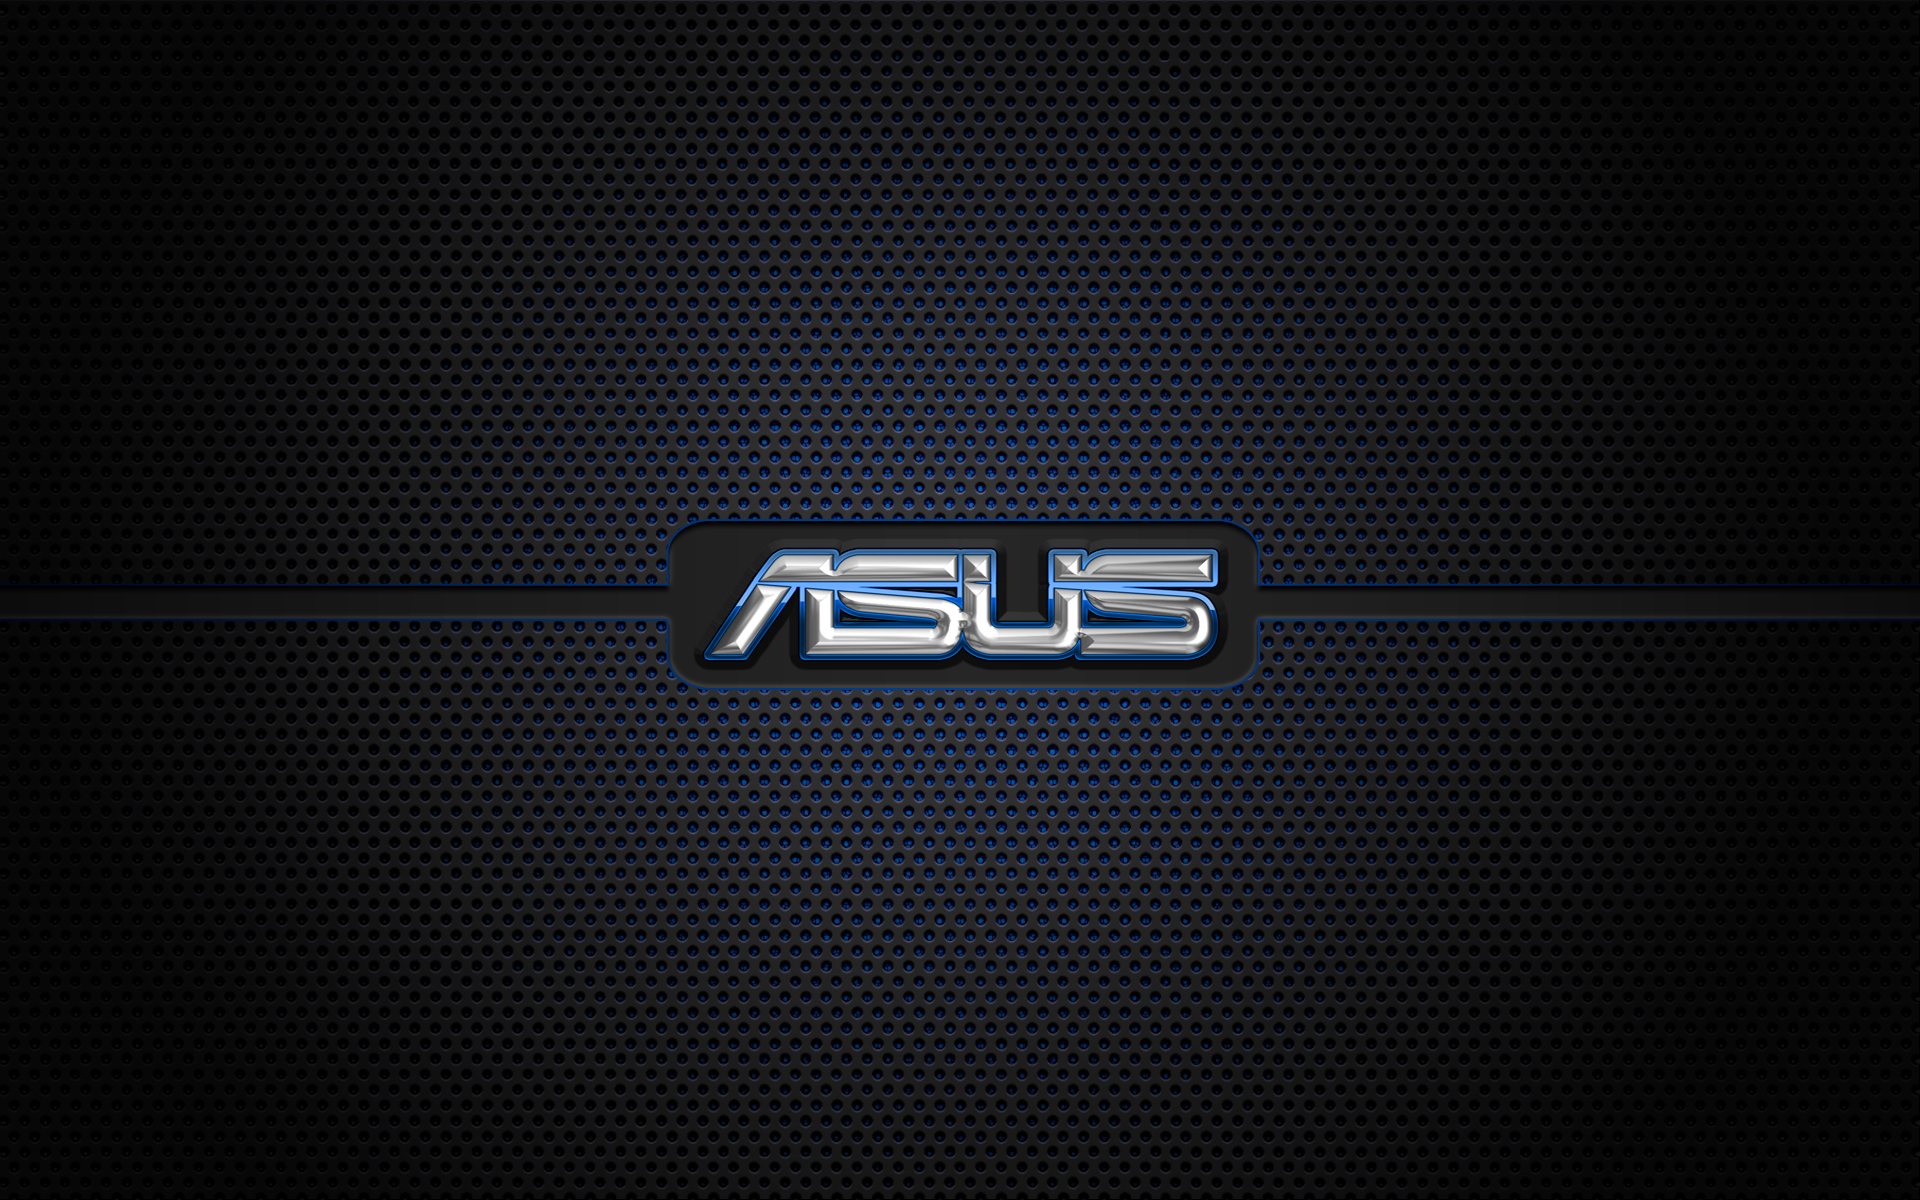 asus_10_by_mullet-d7xc3zw.jpg